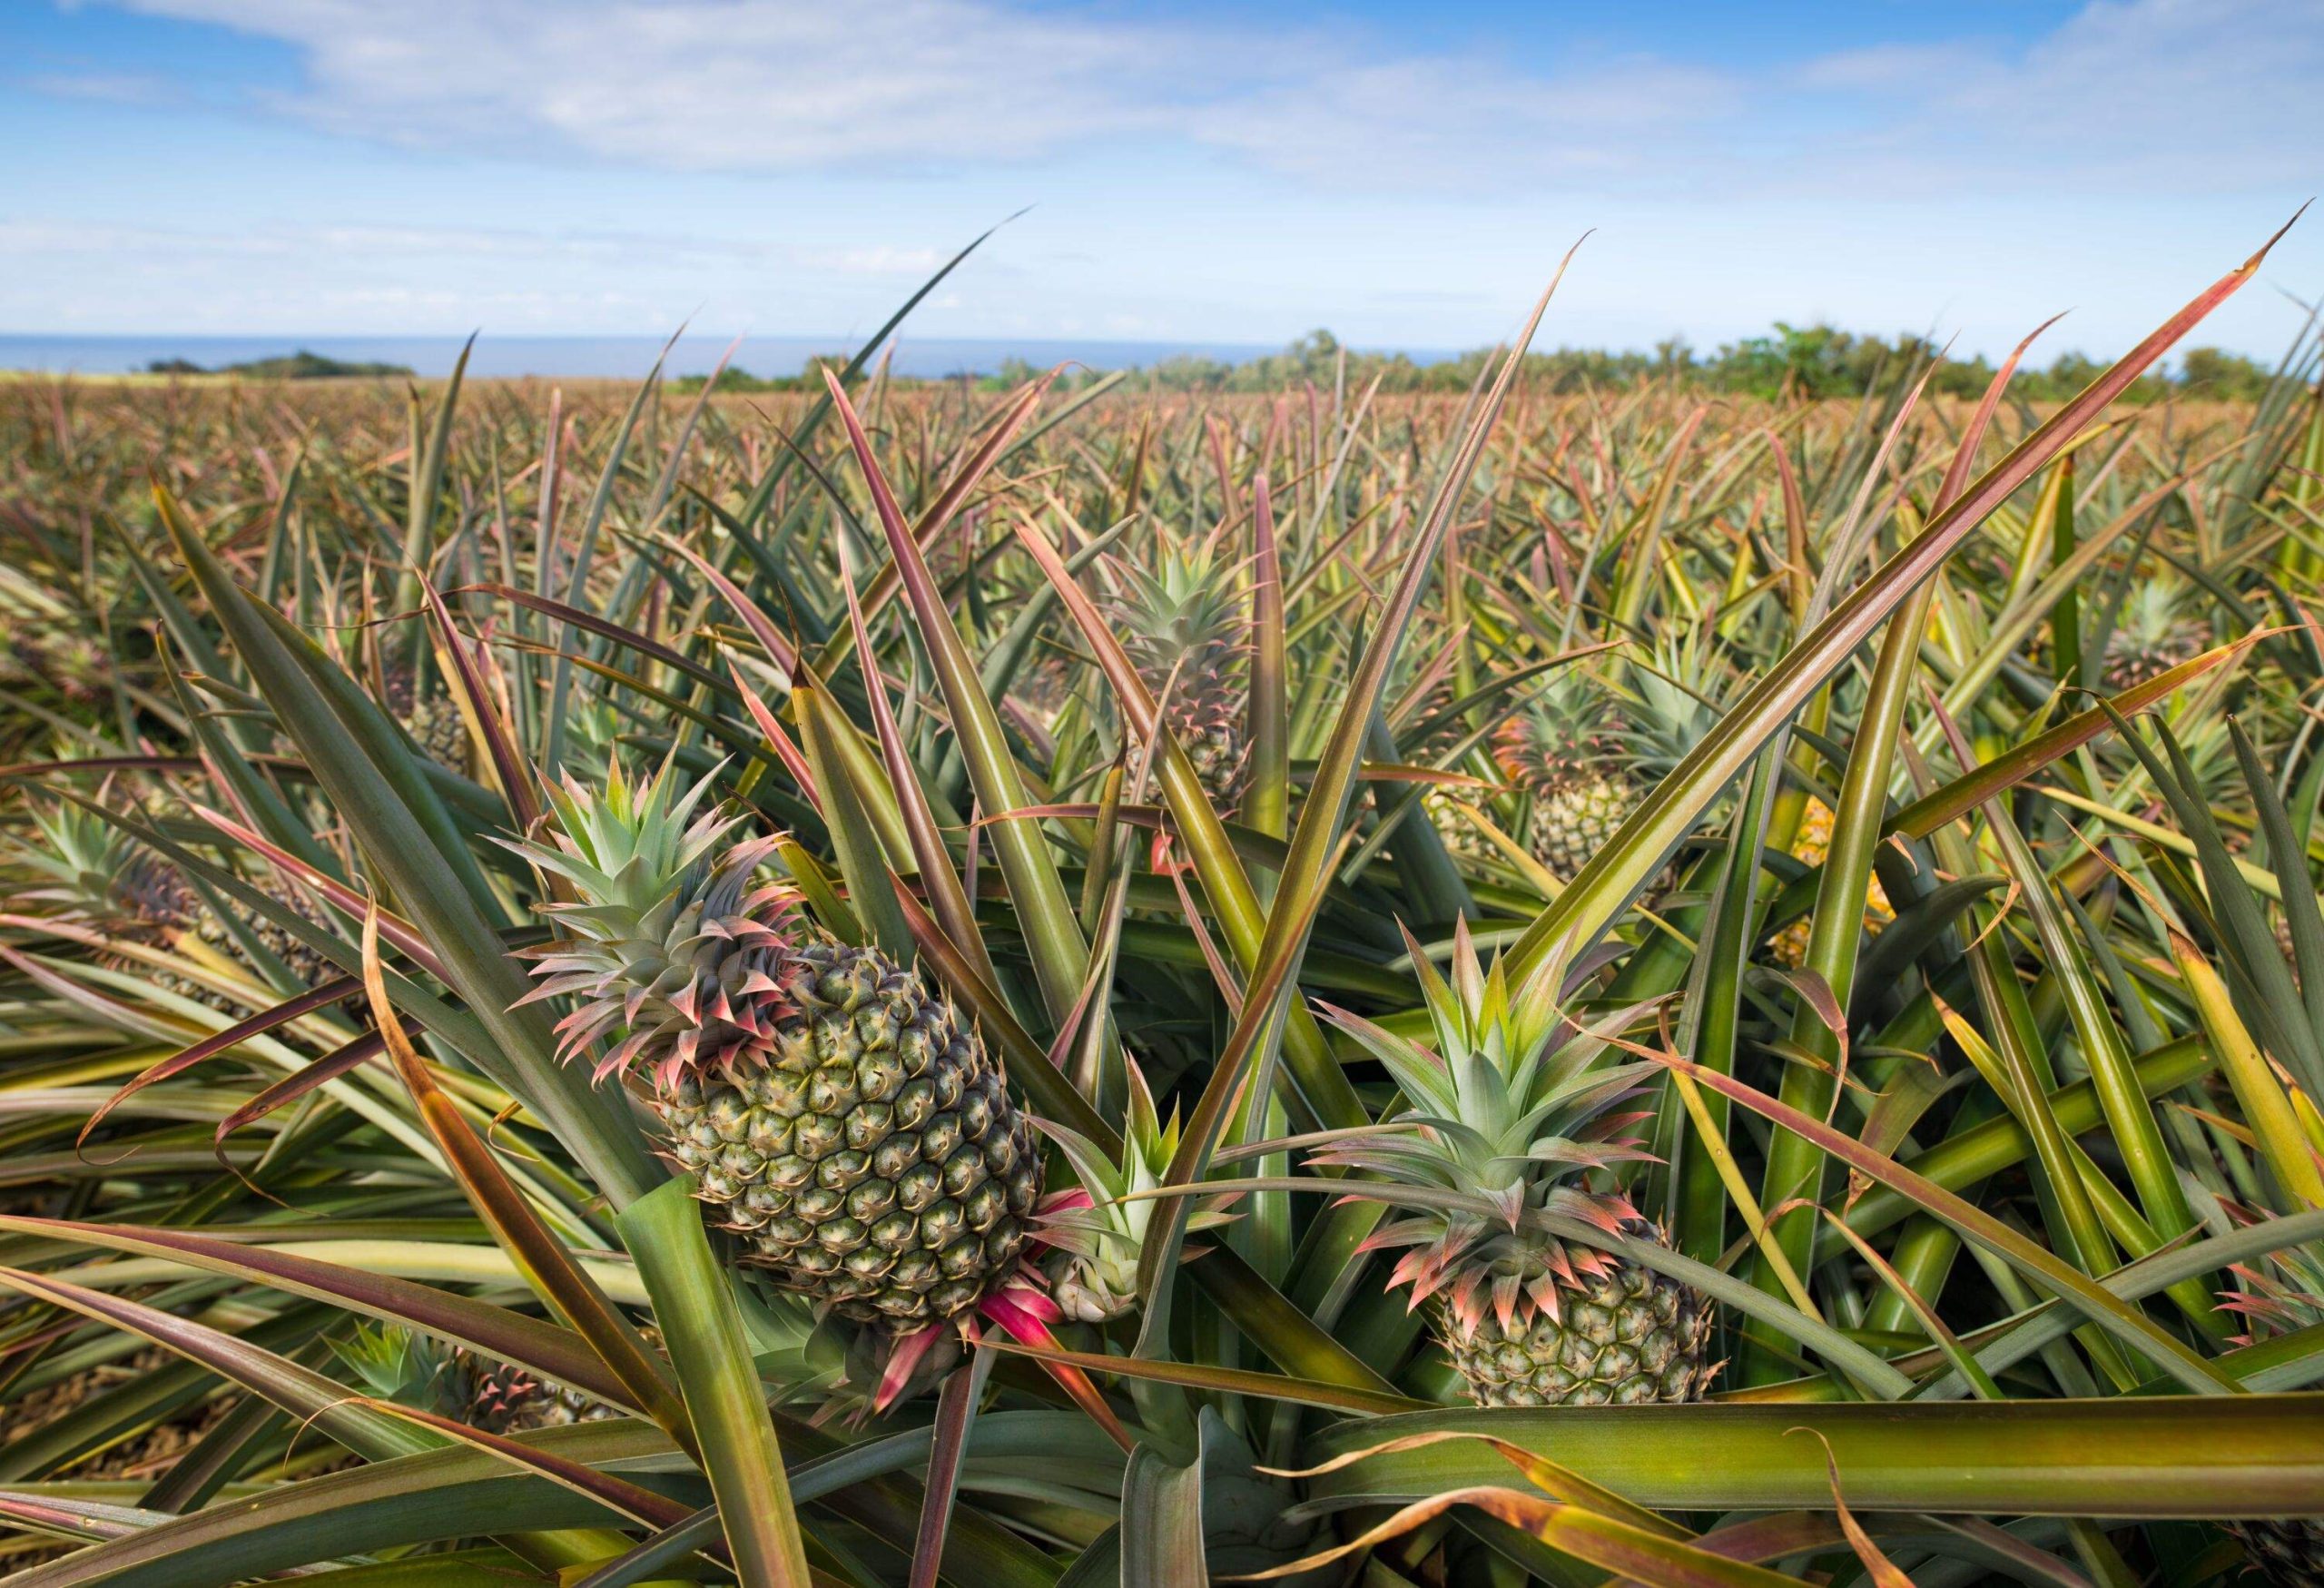 Pineapple Plantation Agriculture Field to the Horizon. Hawaii Islands, USA